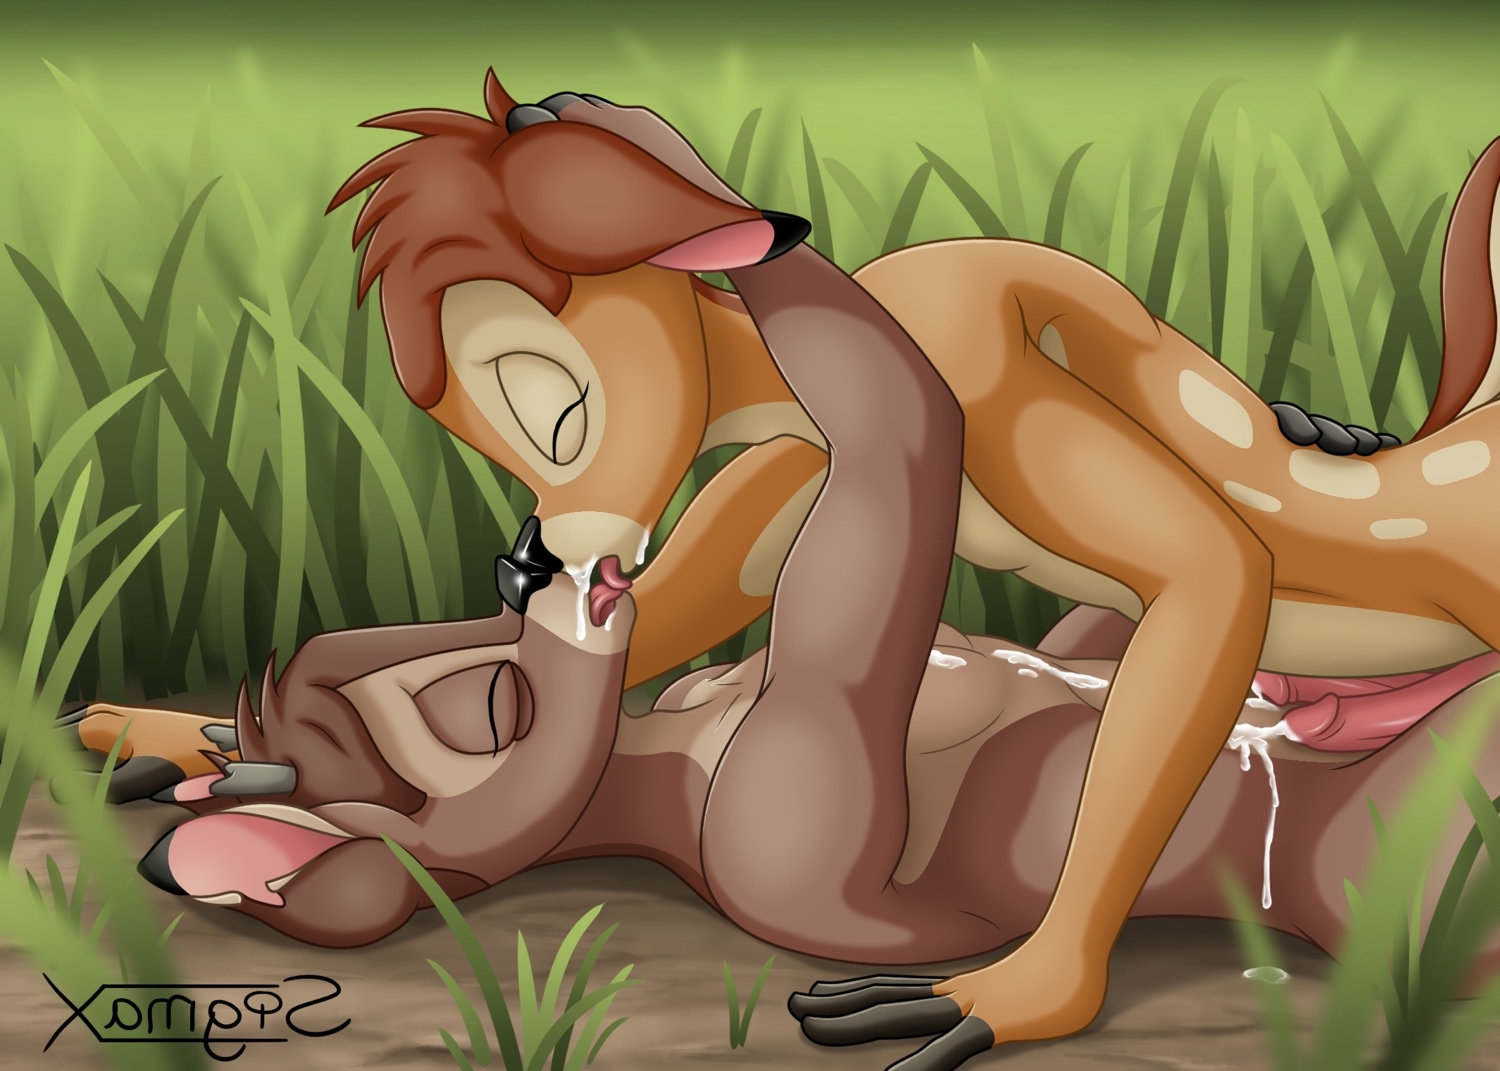 1500px x 1071px - Showing Porn Images for Disney bambi gay dad porn | www.nopeporno.com